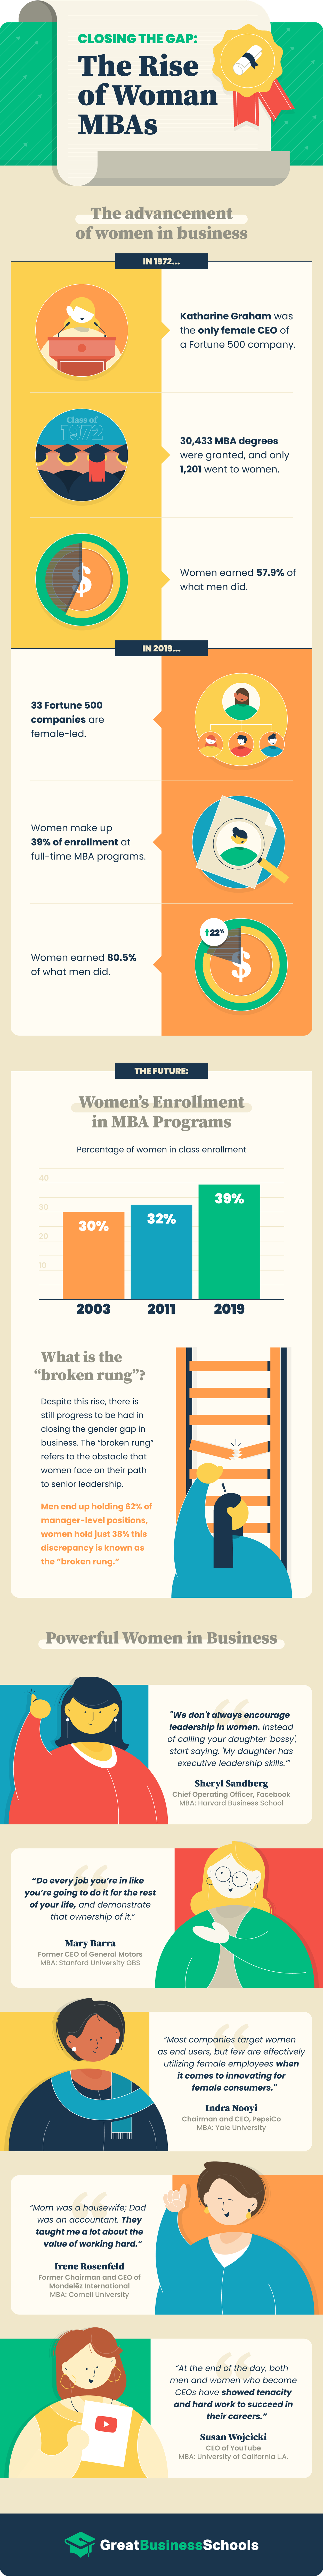 The Rise of Women MBAs